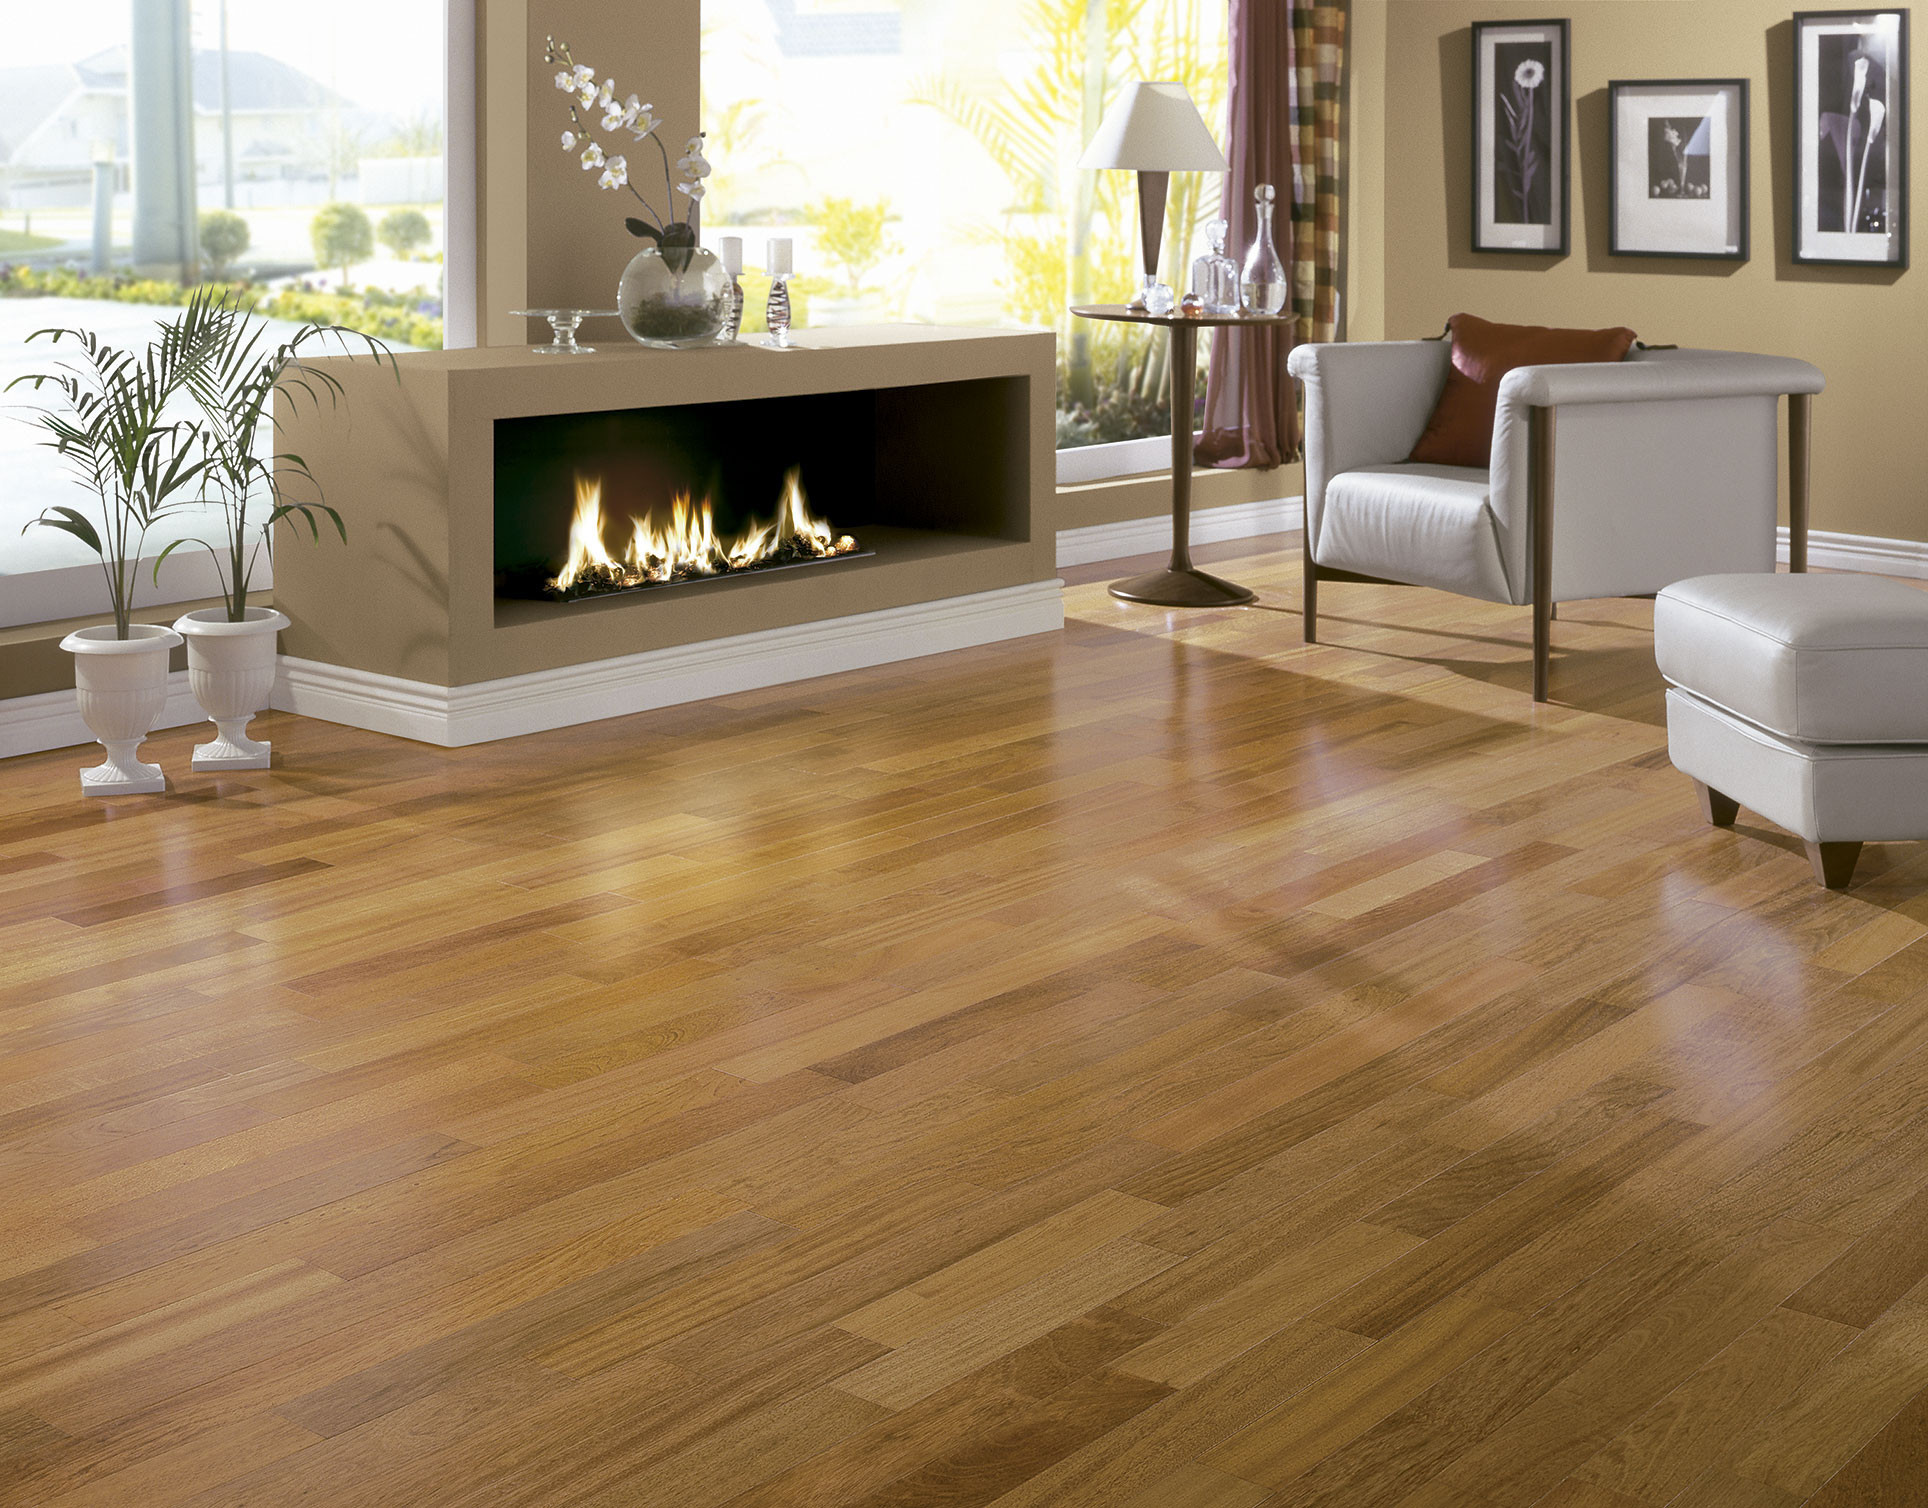 12 Fantastic Images Of Dark Hardwood Floors 2024 free download images of dark hardwood floors of forest accents wood floor lovely engaging discount hardwood flooring with regard to forest accents wood floor lovely engaging discount hardwood flooring 5 w